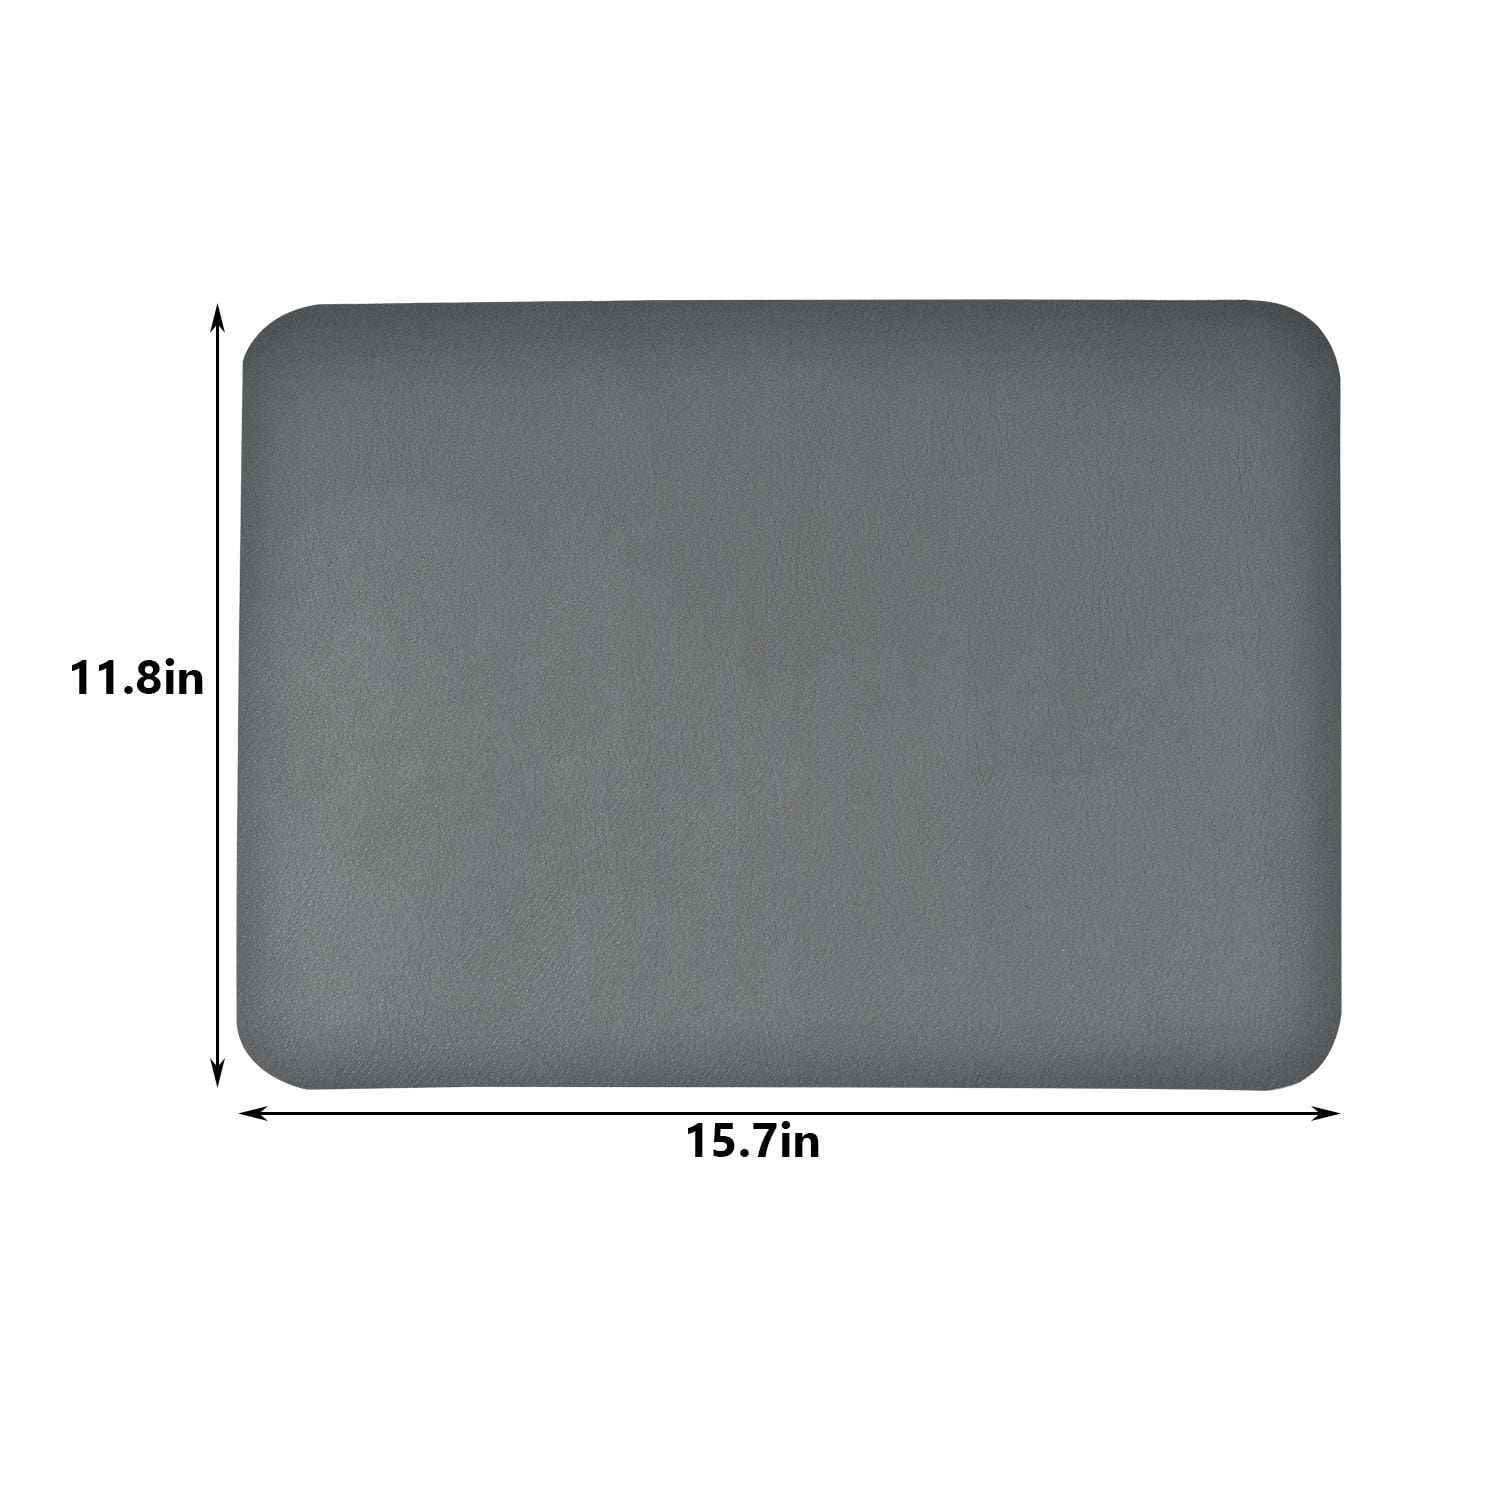 Greyghost Coffee Mat Hide Stain Rubber Backed Absorbent Dish